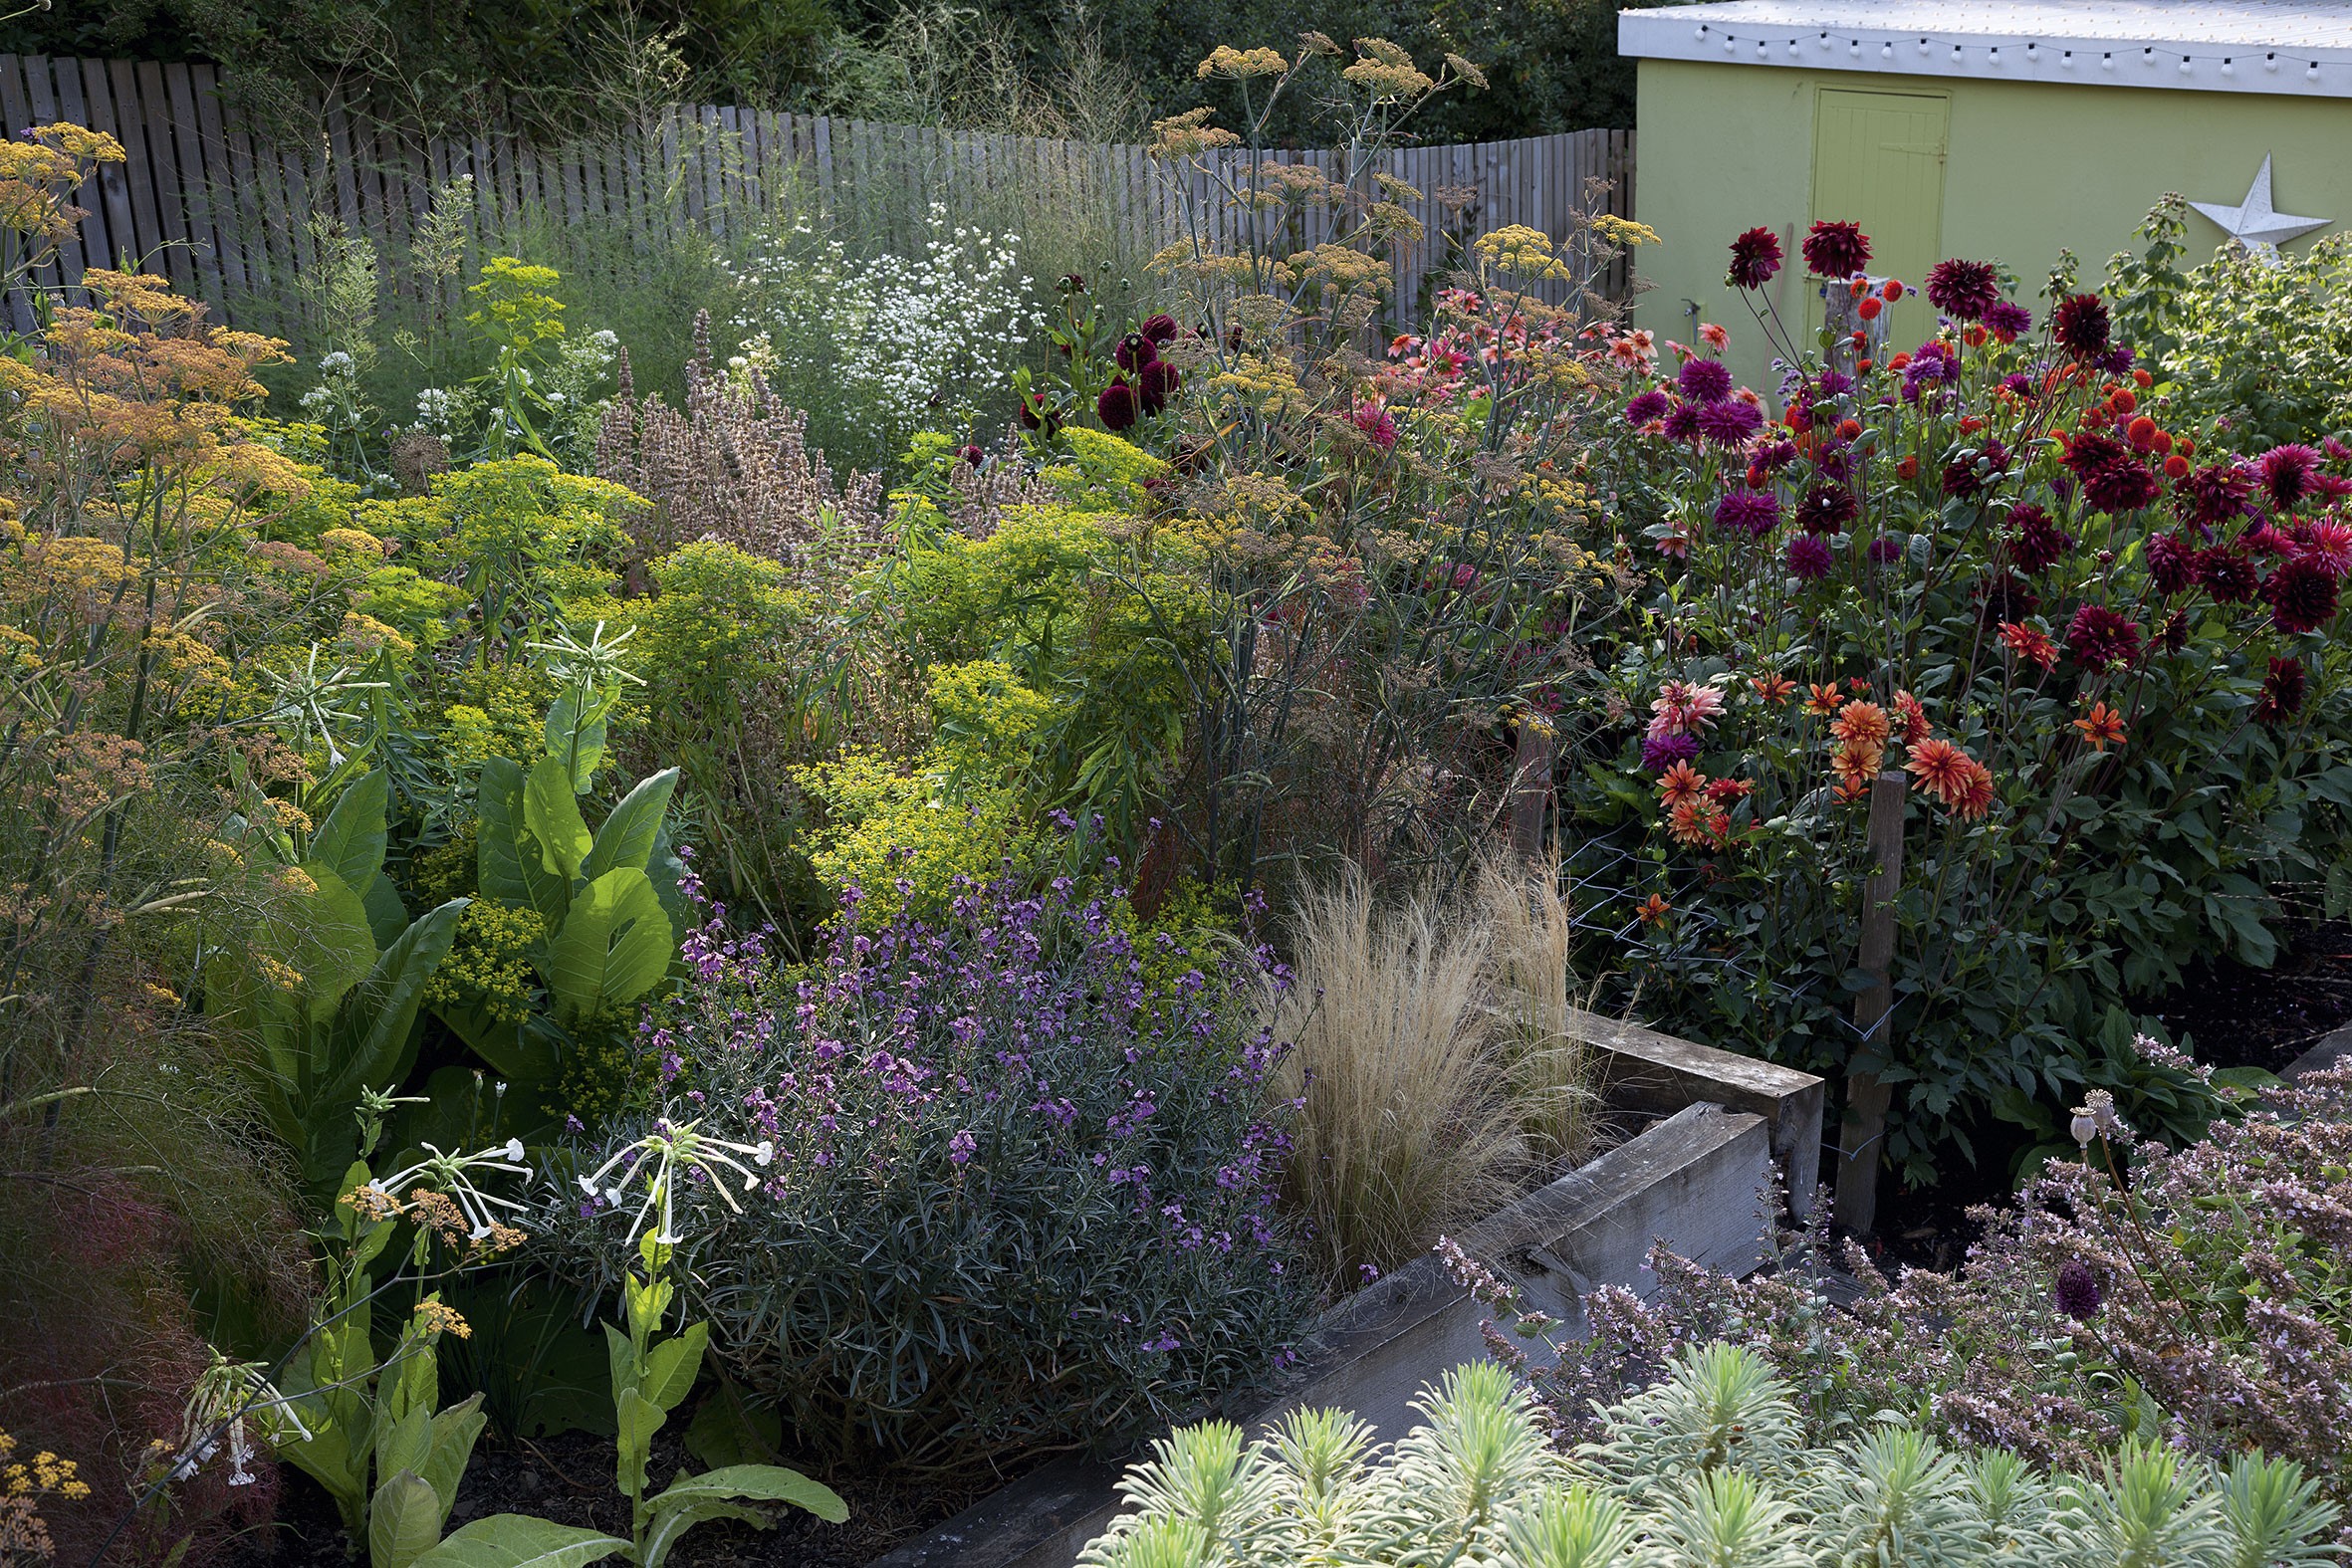 The raised beds become a tapestry of colour and texture in high summer. Interwoven plants include Nicotiana sylvestris, Erysimum ‘Bowles’s Mauve’, feathery bronze fennel (Foeniculum vulgare ‘Purpureum’), the horned spurge Euphorbia ceratocarpa and Nepeta grandiflora ‘Dawn to Dusk’.